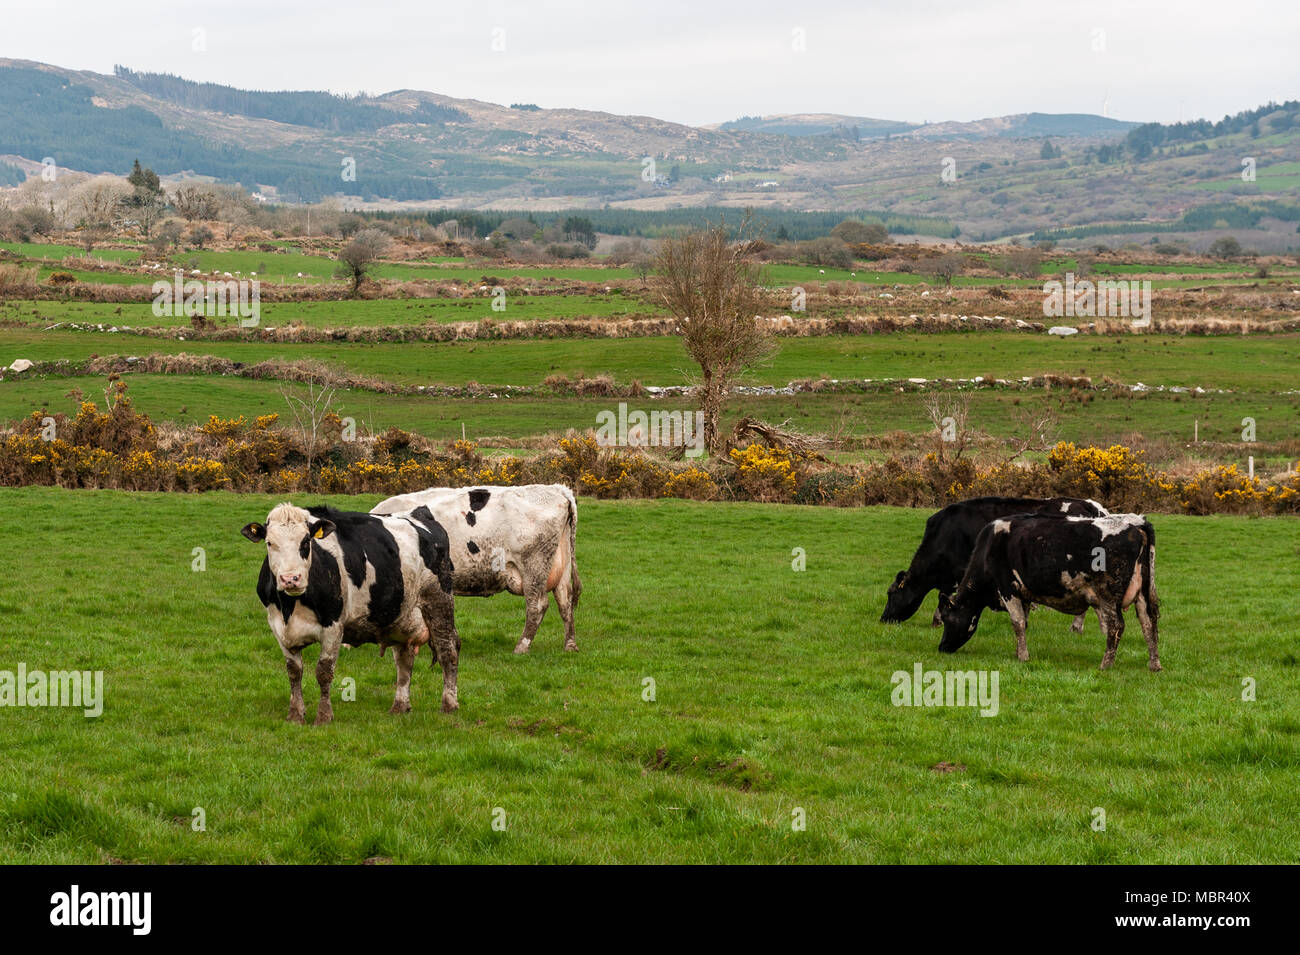 Dairy cows/cattle grazing in a green/grass field during the fodder crisis in Ballydehob, West Cork, Ireland with copy space Stock Photo